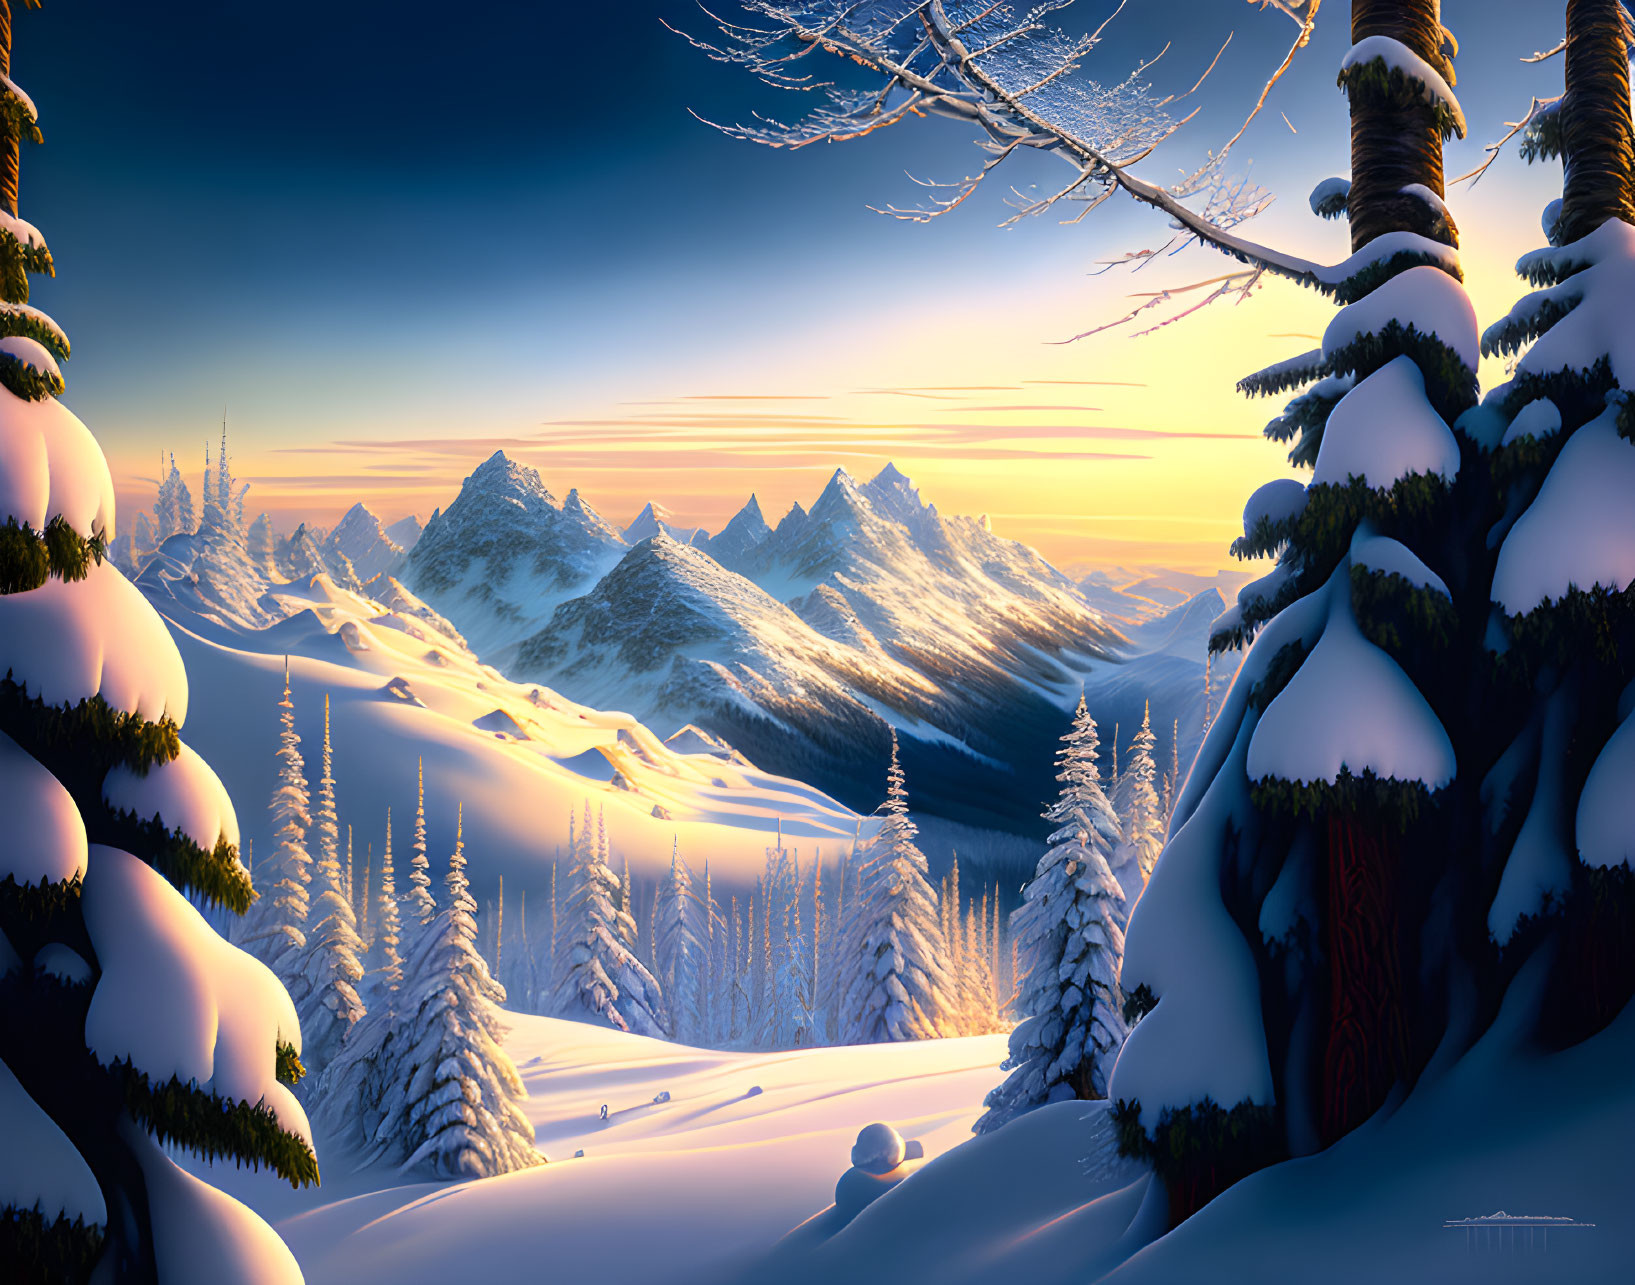 Snowy Mountains and Pine Trees in Twilight Winter Scene